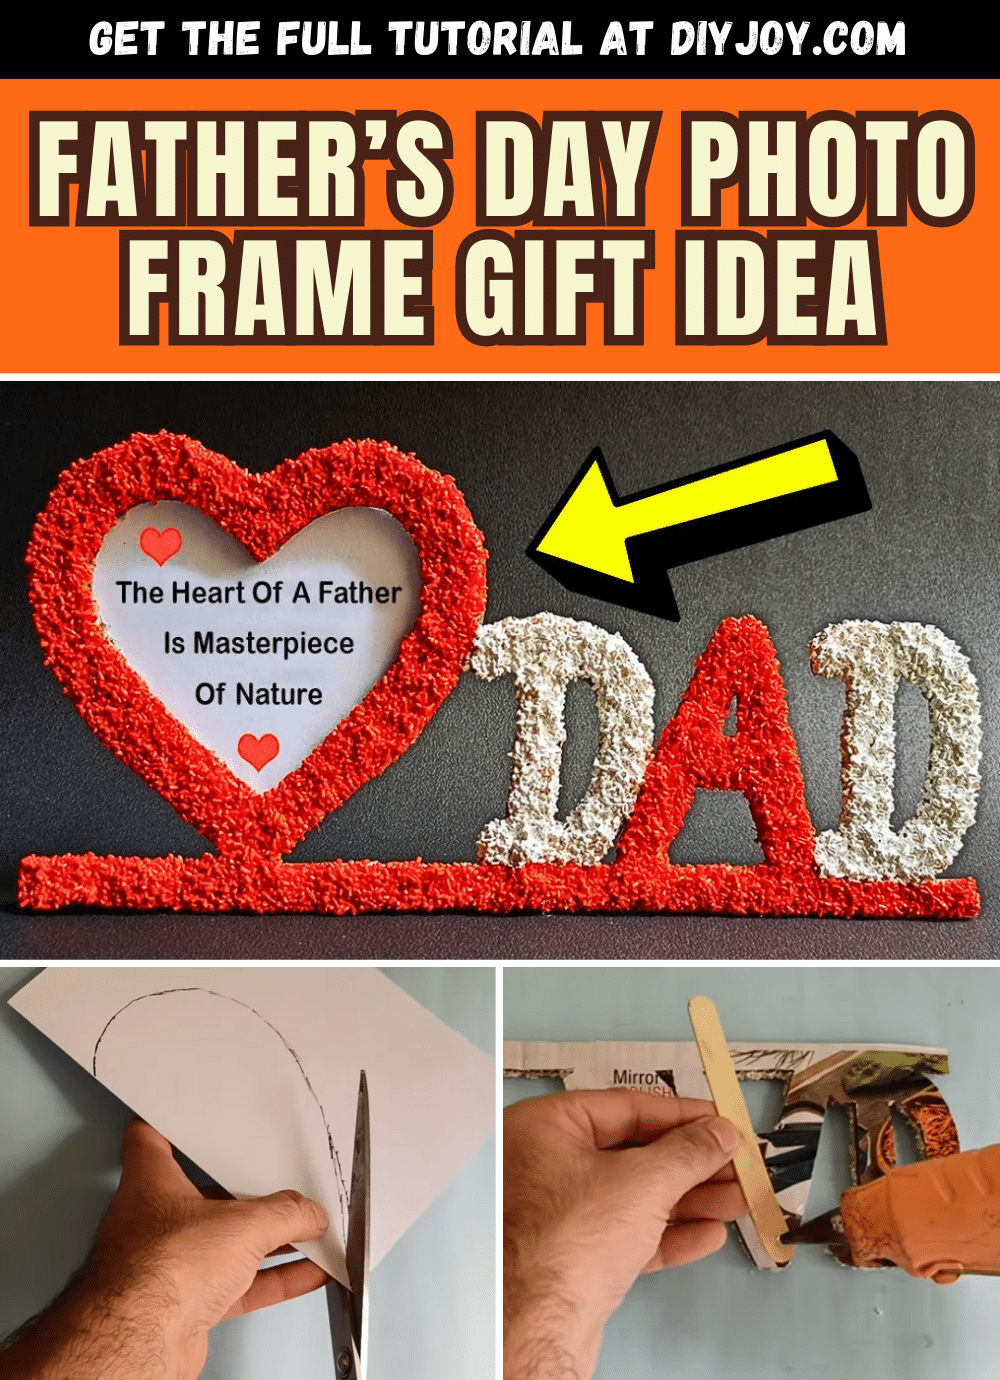 Father’s Day Photo Frame gift idea